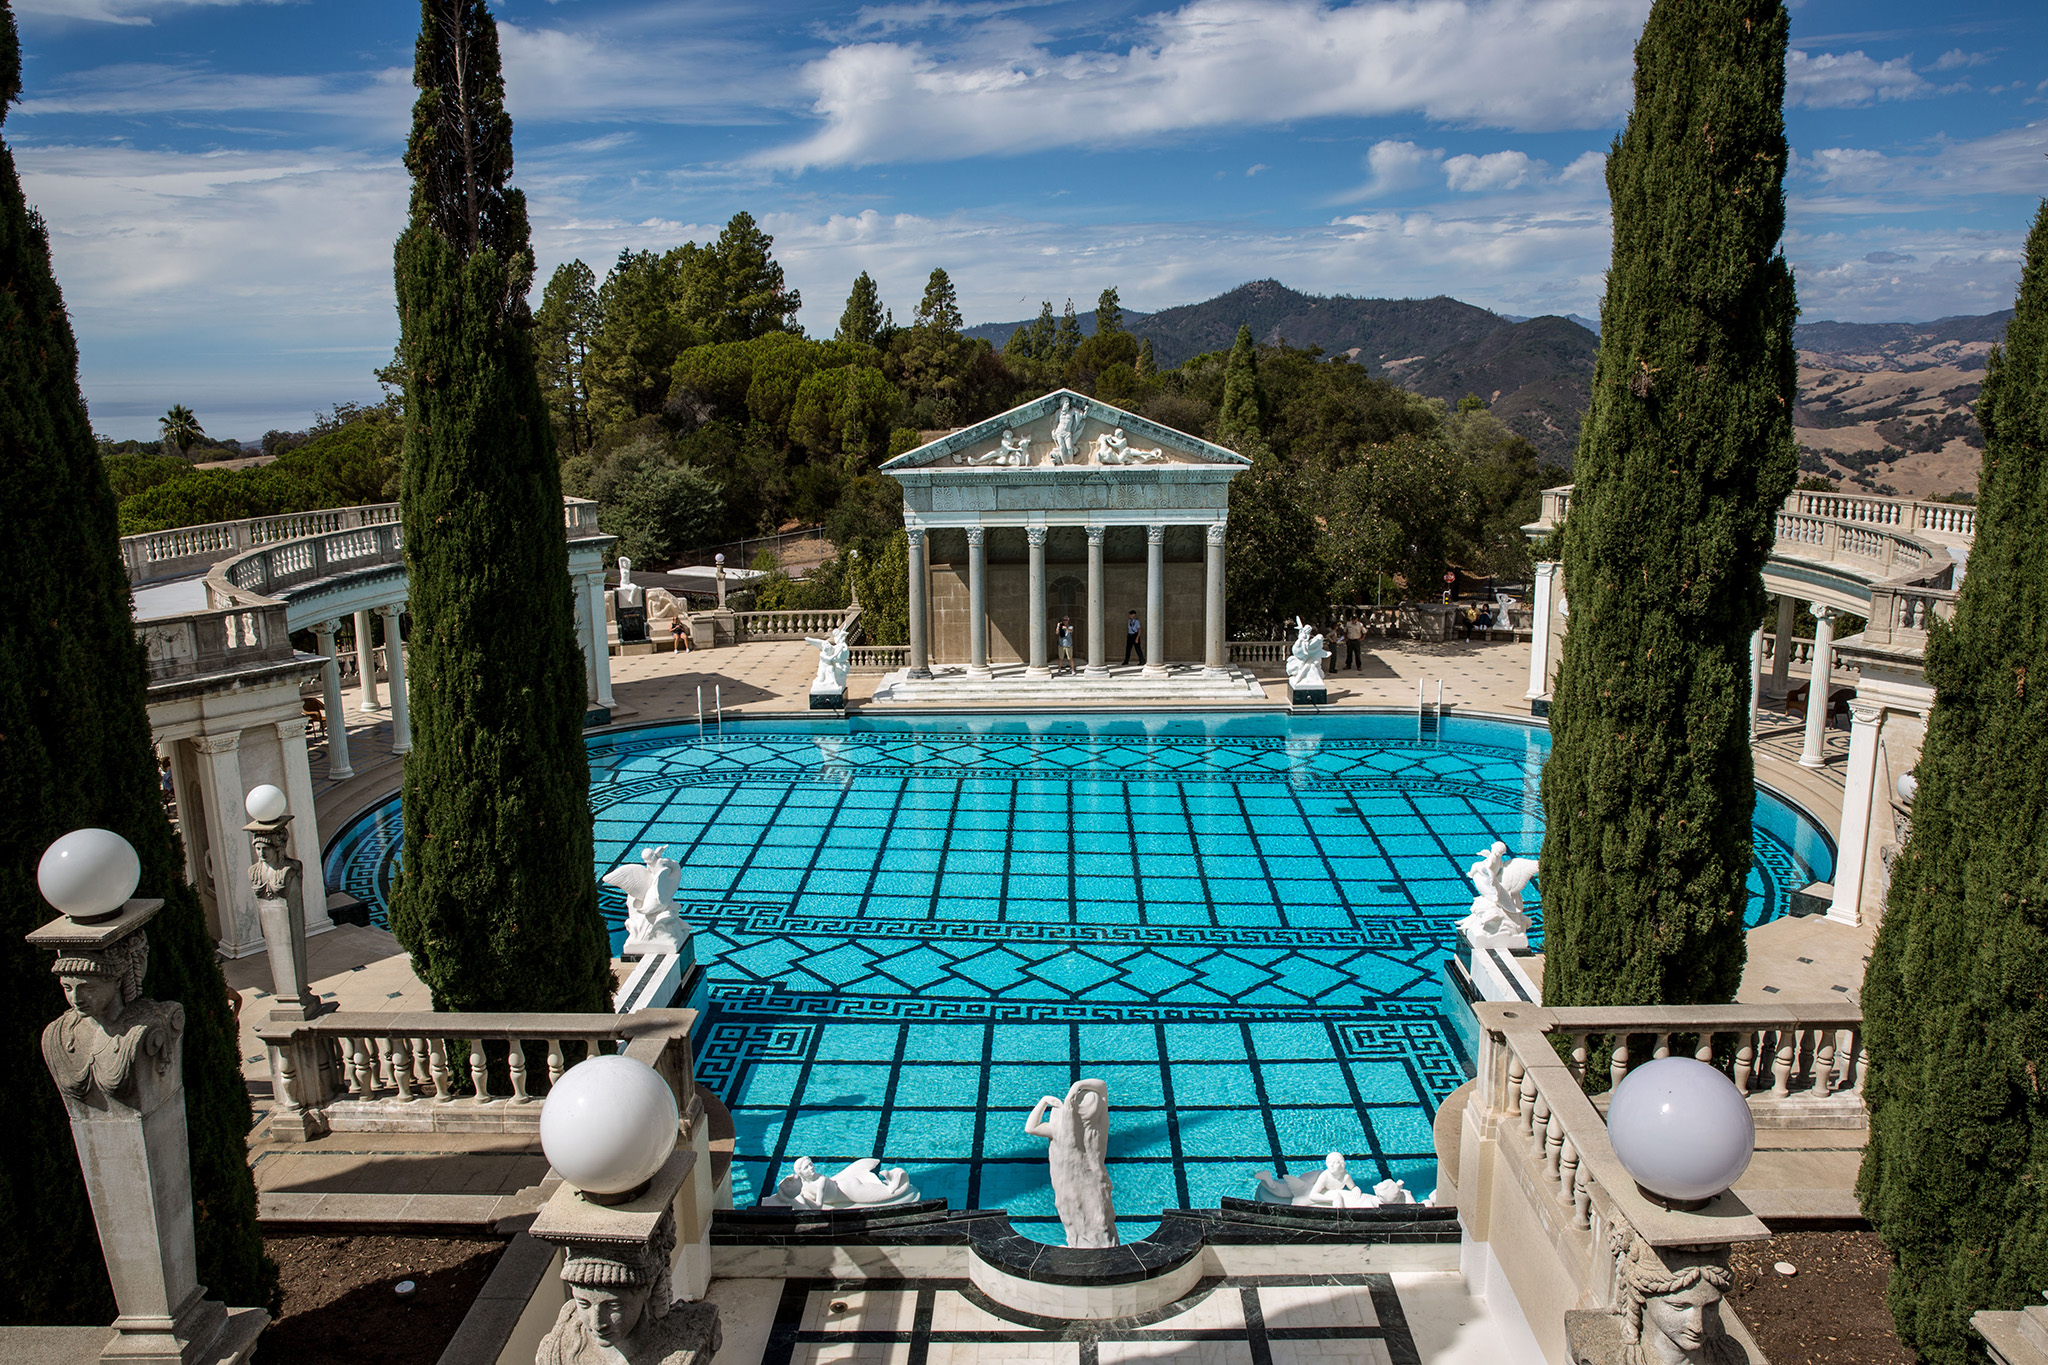 hearst castle without tour